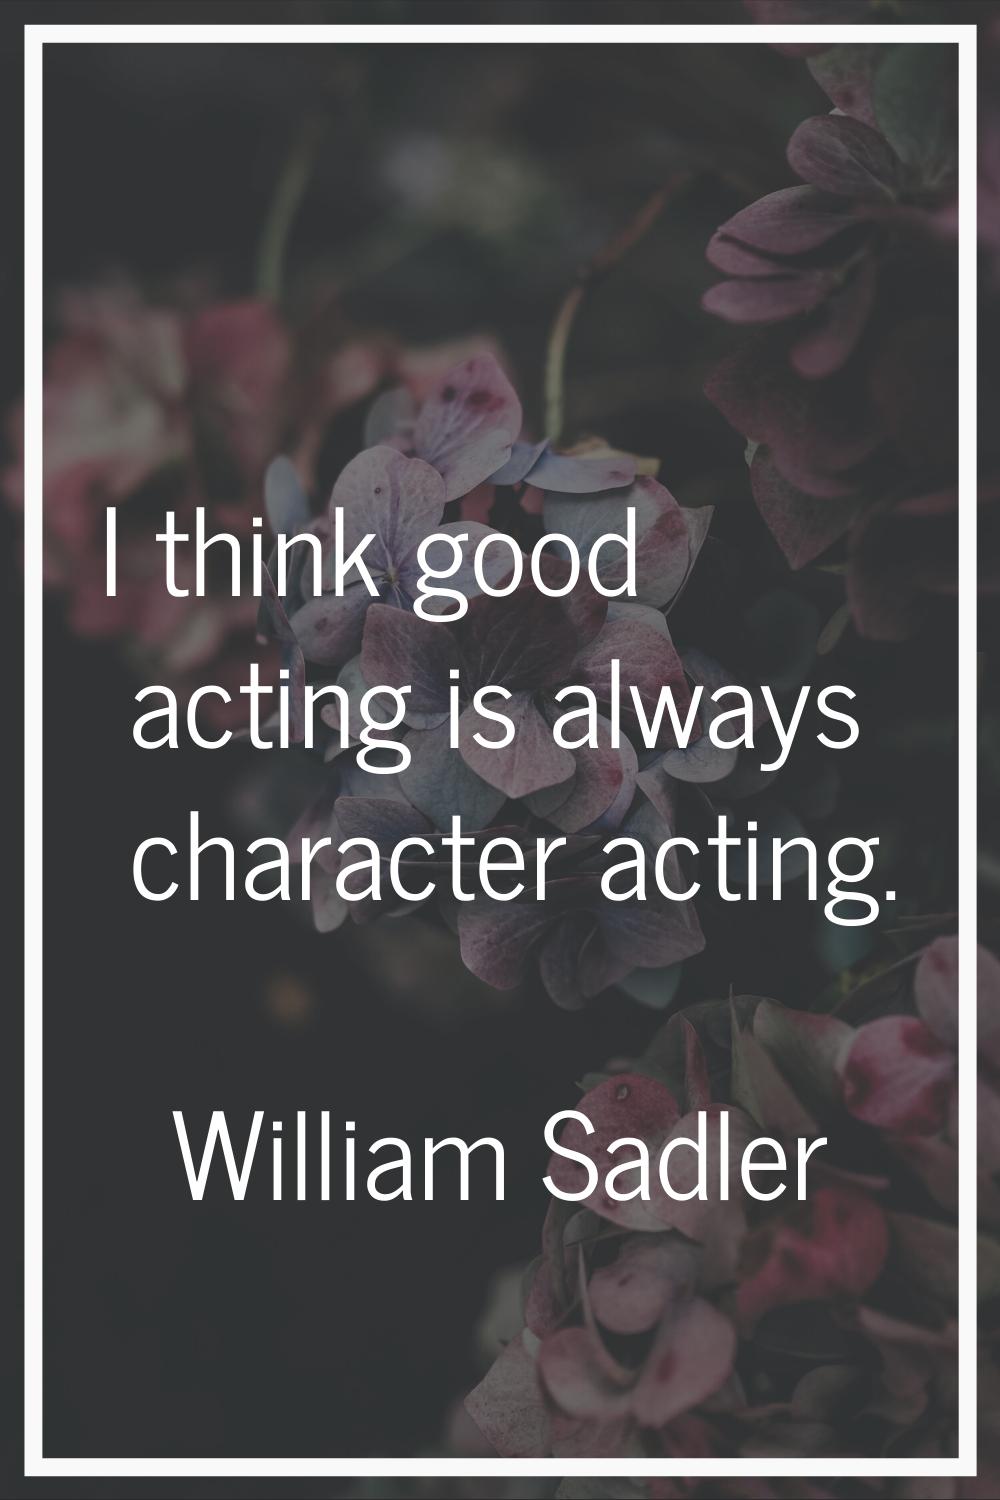 I think good acting is always character acting.